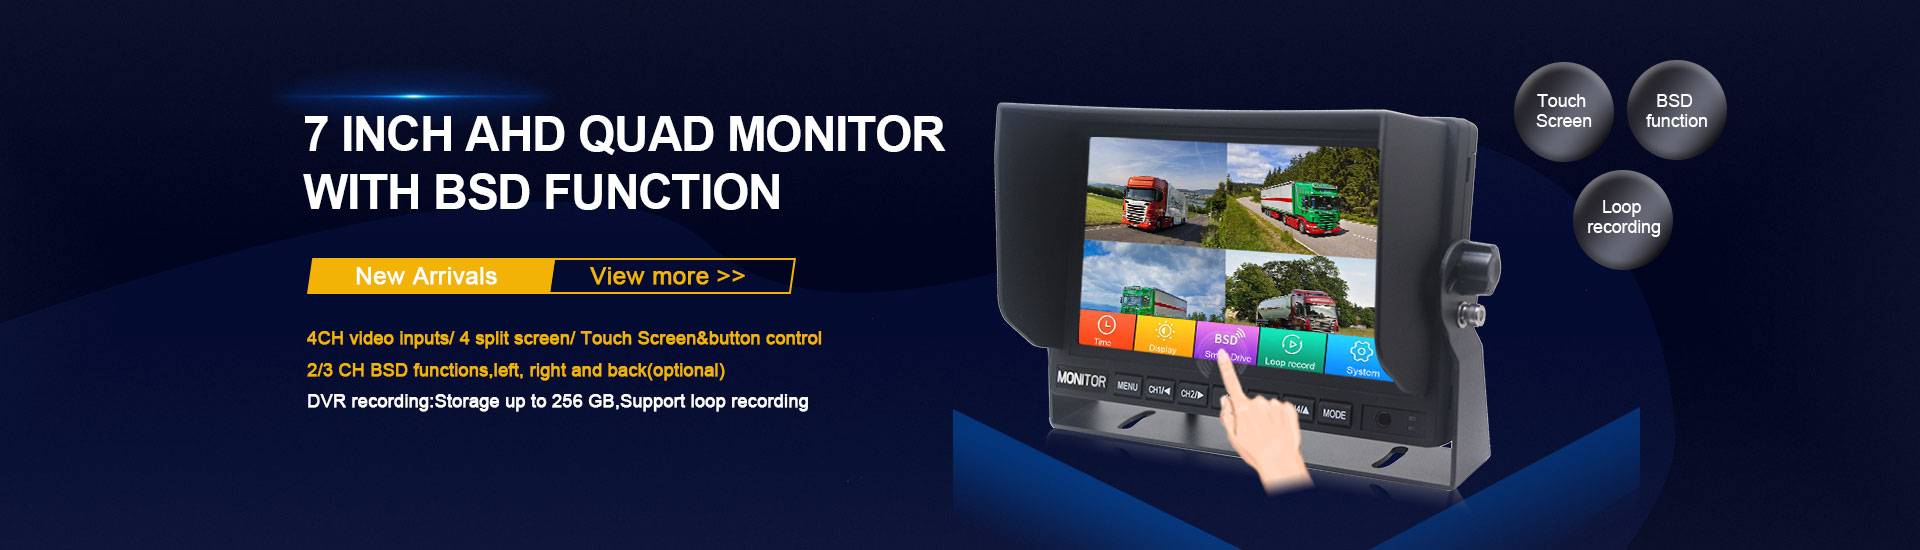 7 Inch AHD Quad Monitor With BSD Function  